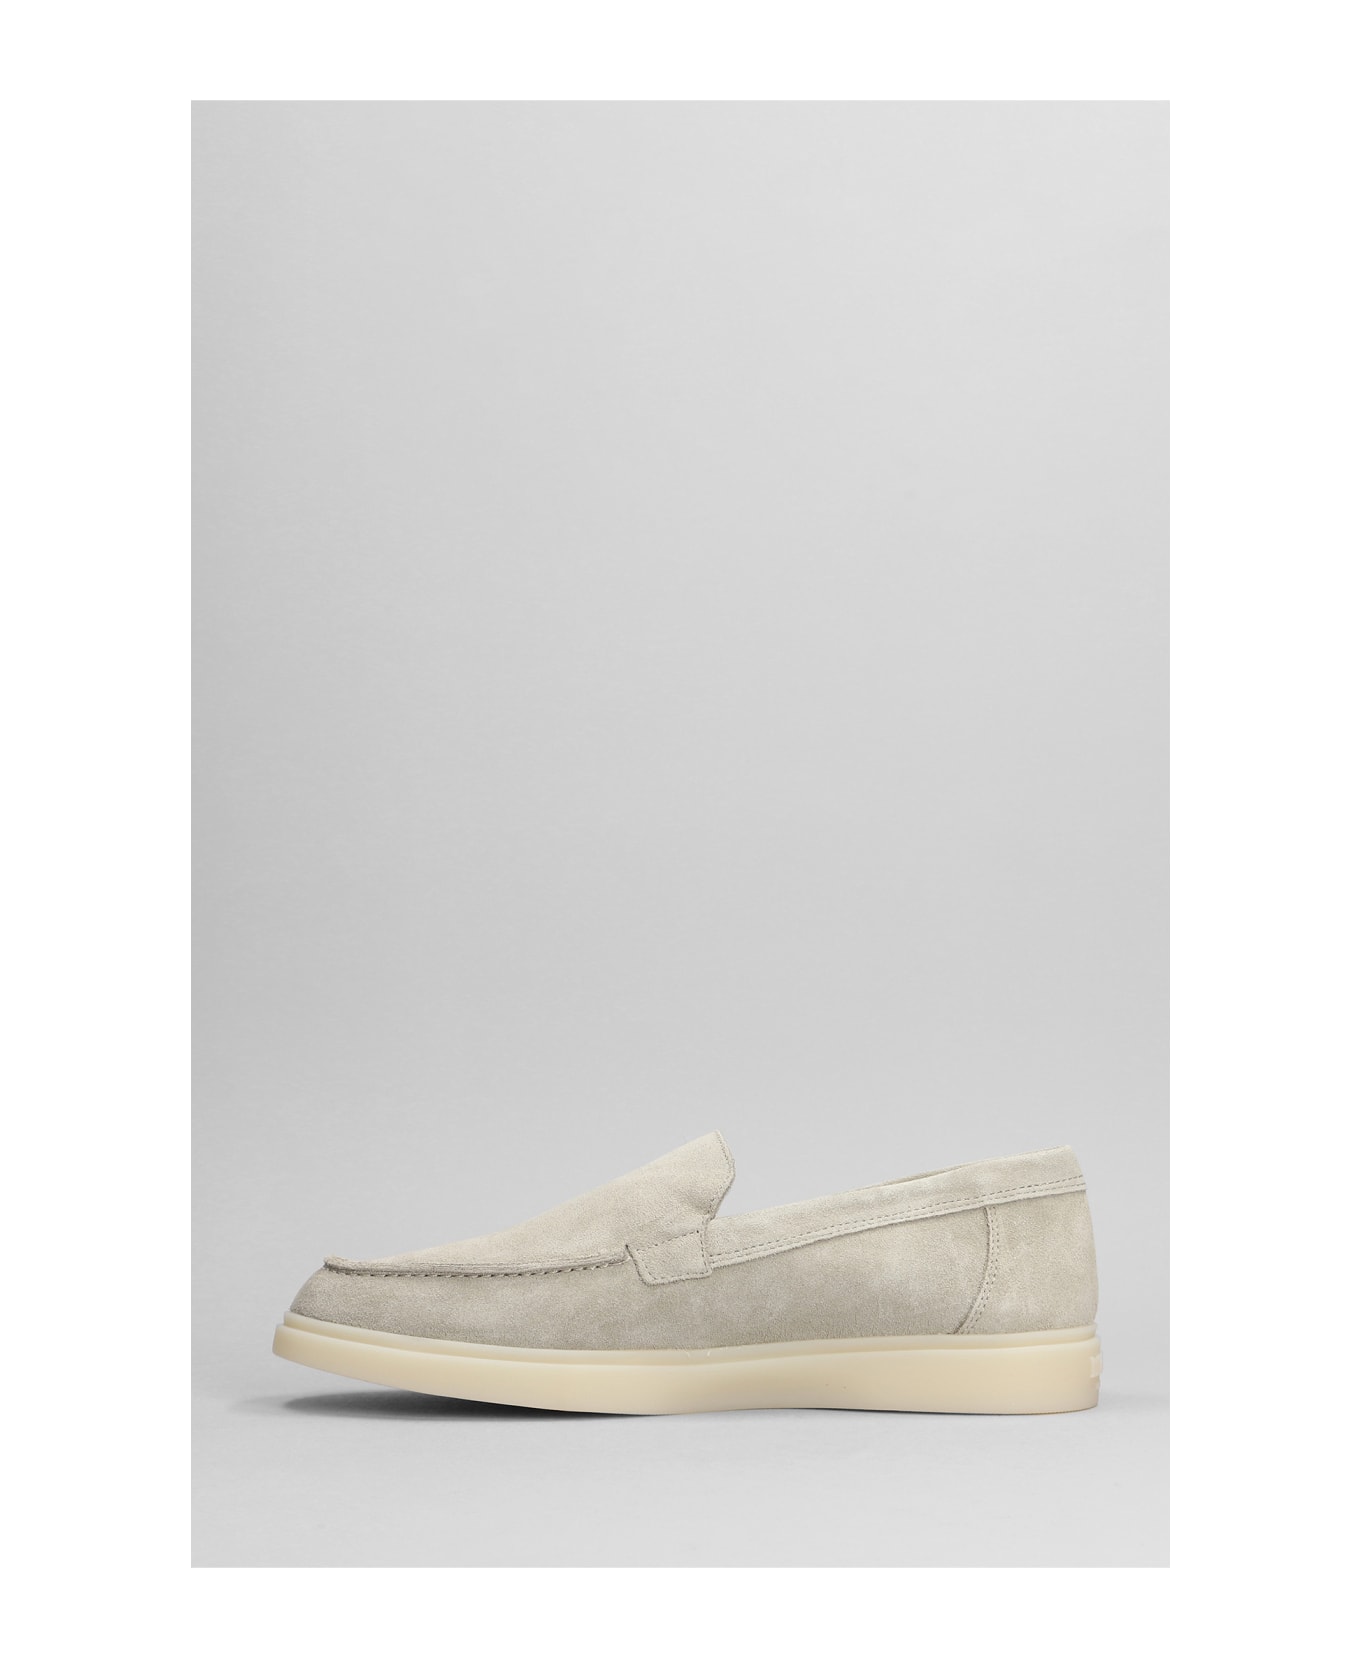 Mason Garments Amalfi Loafers In Taupe Suede - taupe